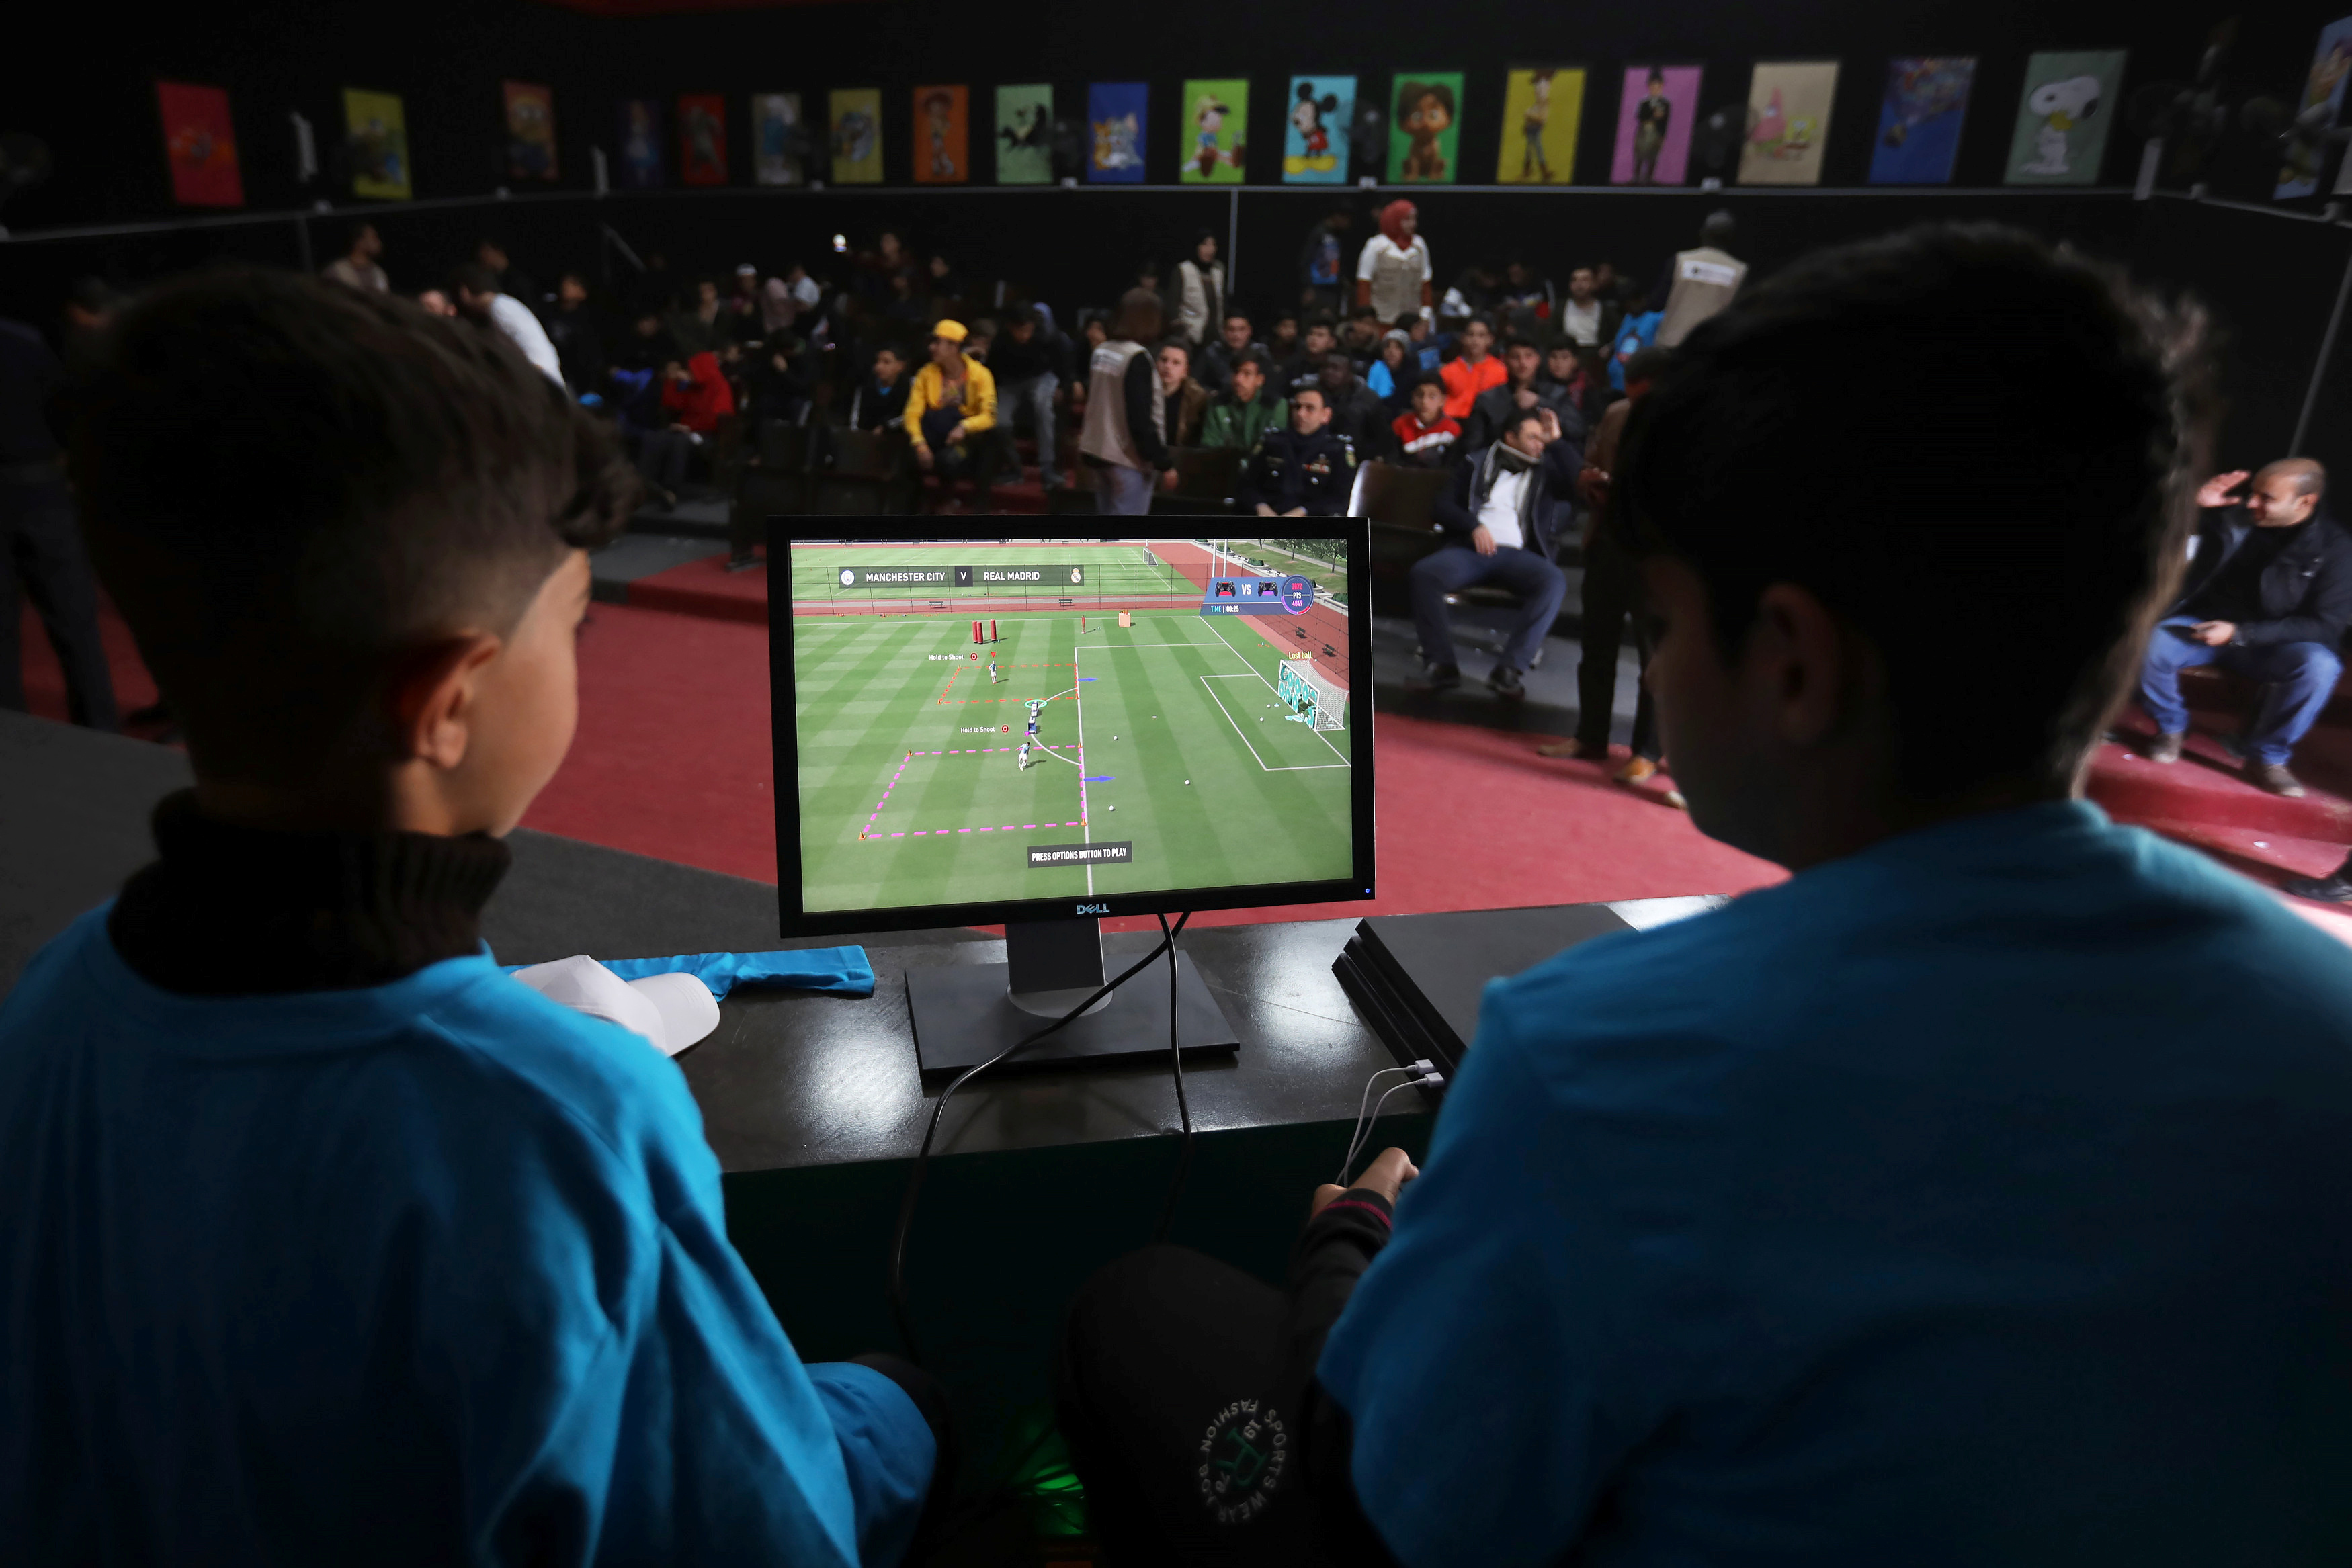 Syrian refugee children take part in the first e-sports tournament organised in the Zaatari refugee camp near the border city of Mafraq, Jordan February 1, 2020. Picture taken February 1, 2020. REUTERS/Muhammad Hamed